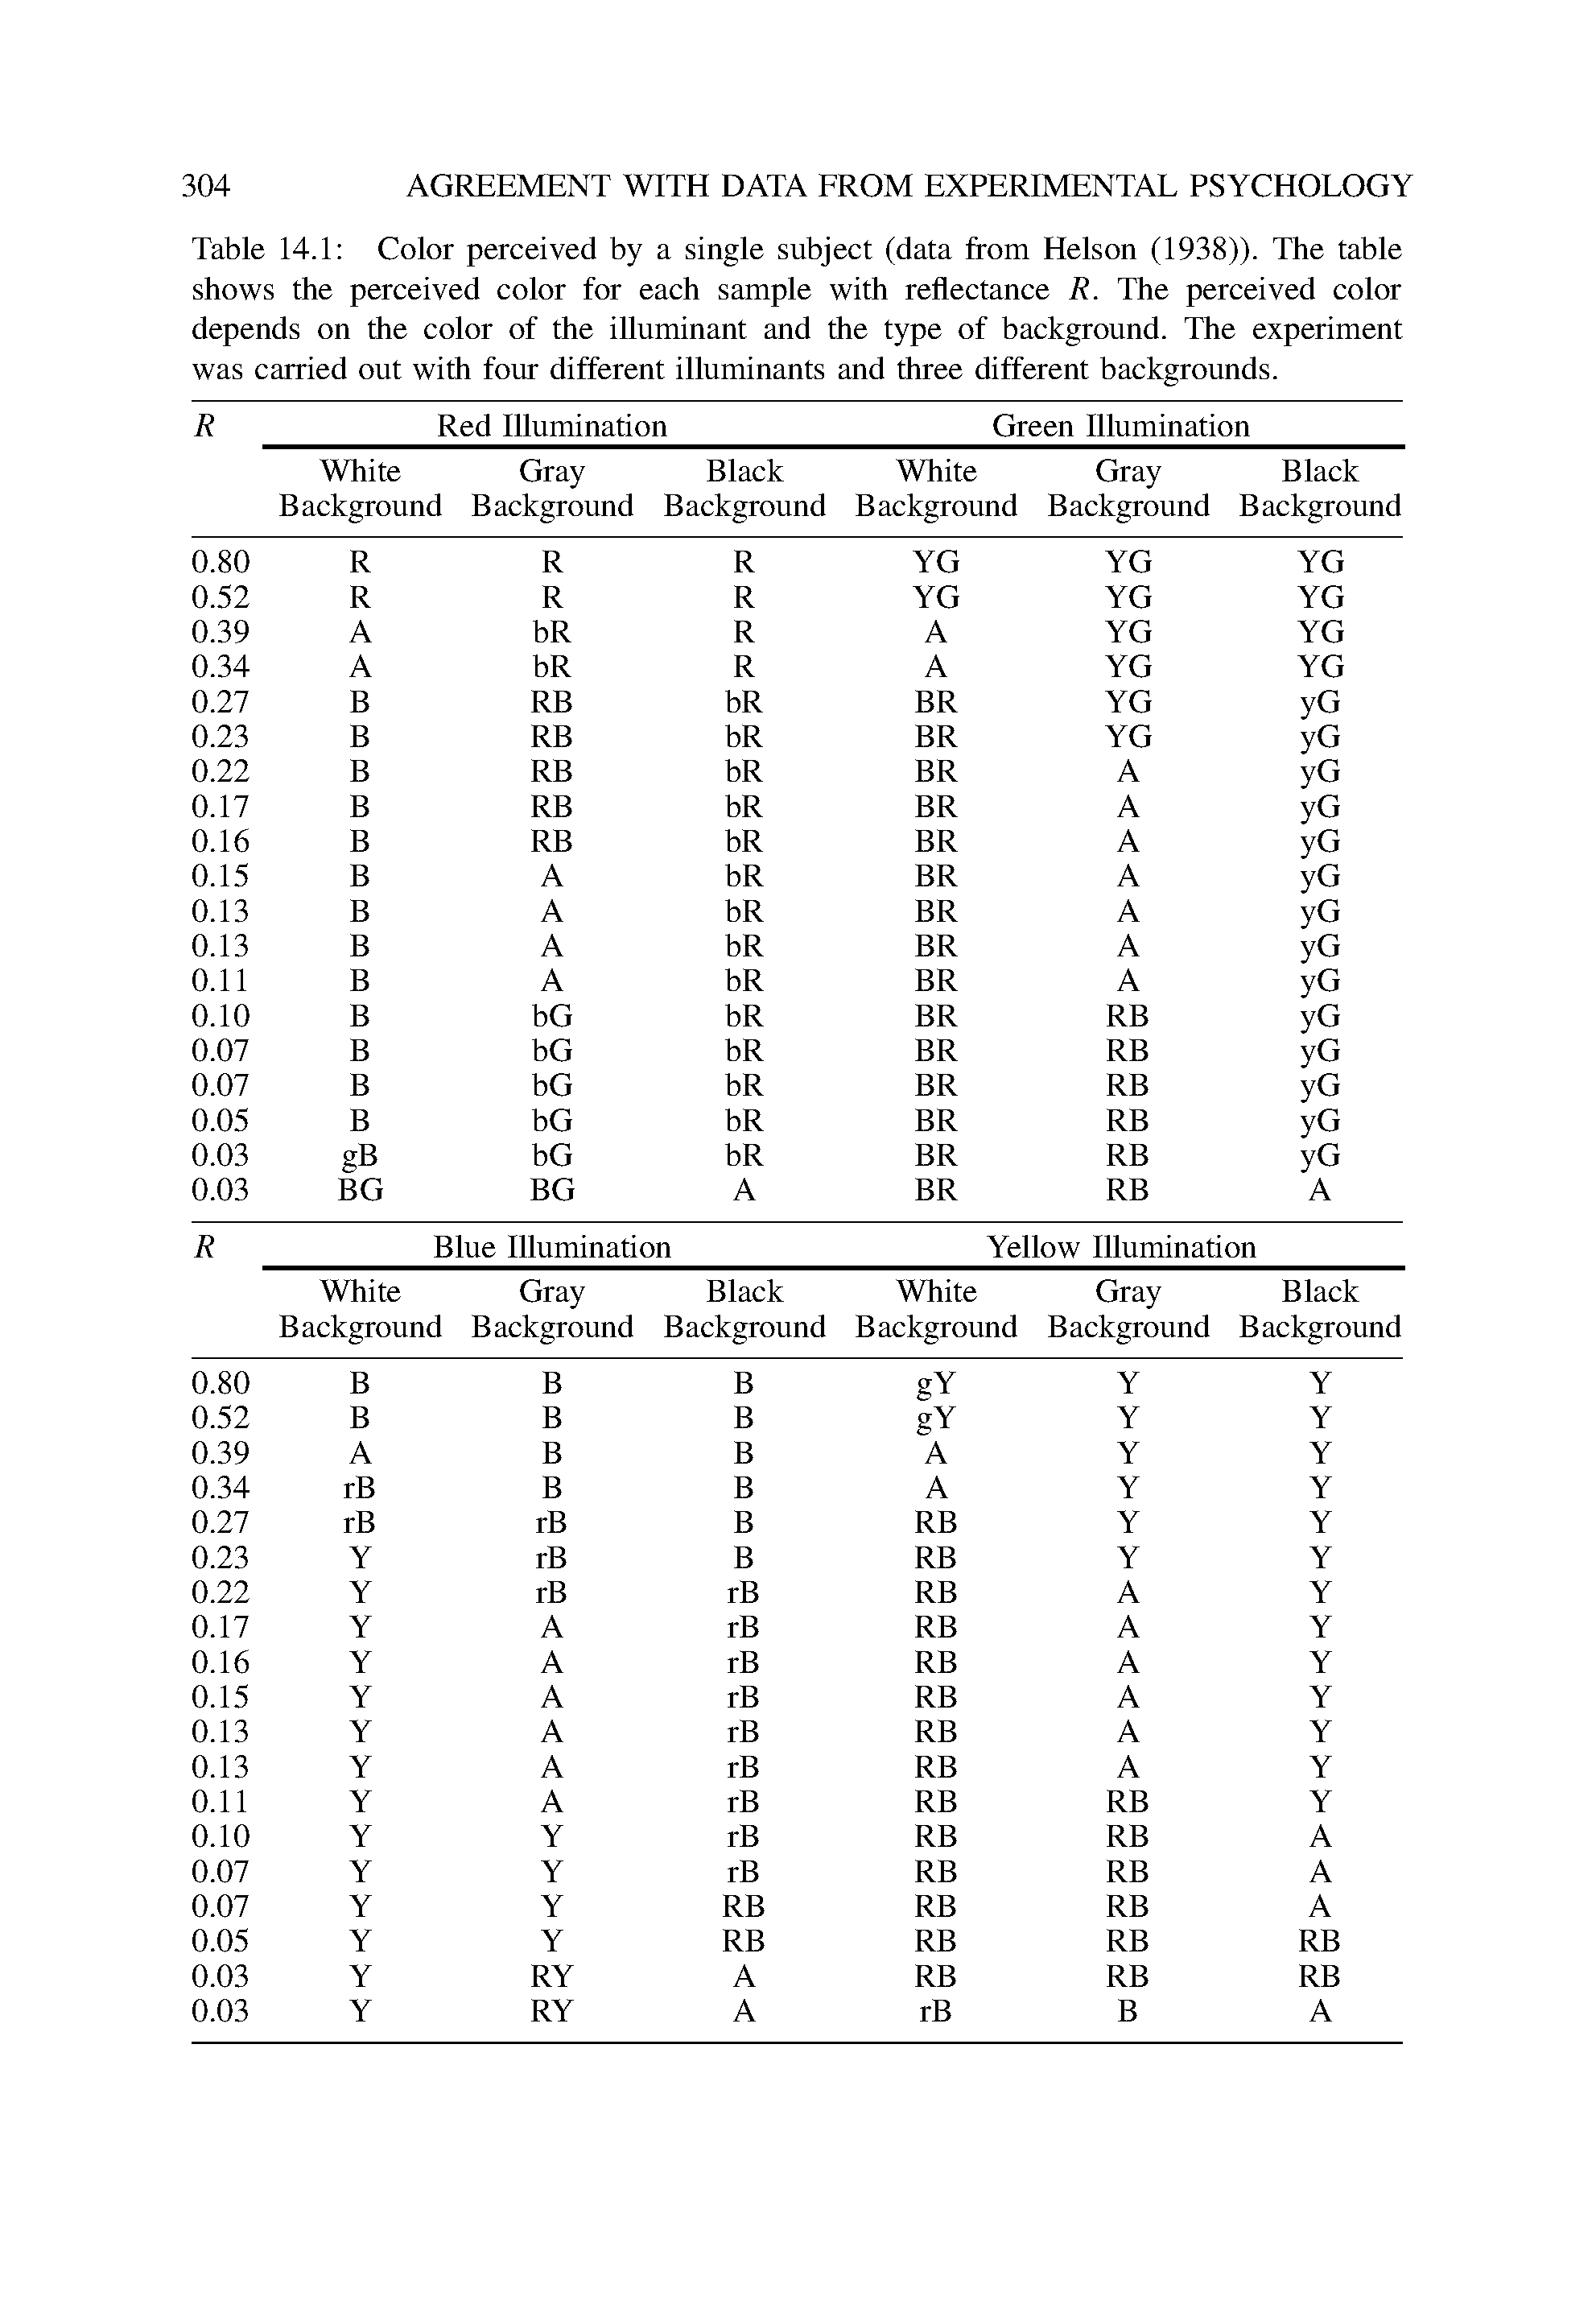 Table 14.1 Color perceived by a single subject (data from Helson (1938)). The table shows the perceived color for each sample with reflectance R. The perceived color depends on the color of the illuminant and the type of background. The experiment was carried out with four different illuminants and three different backgrounds.